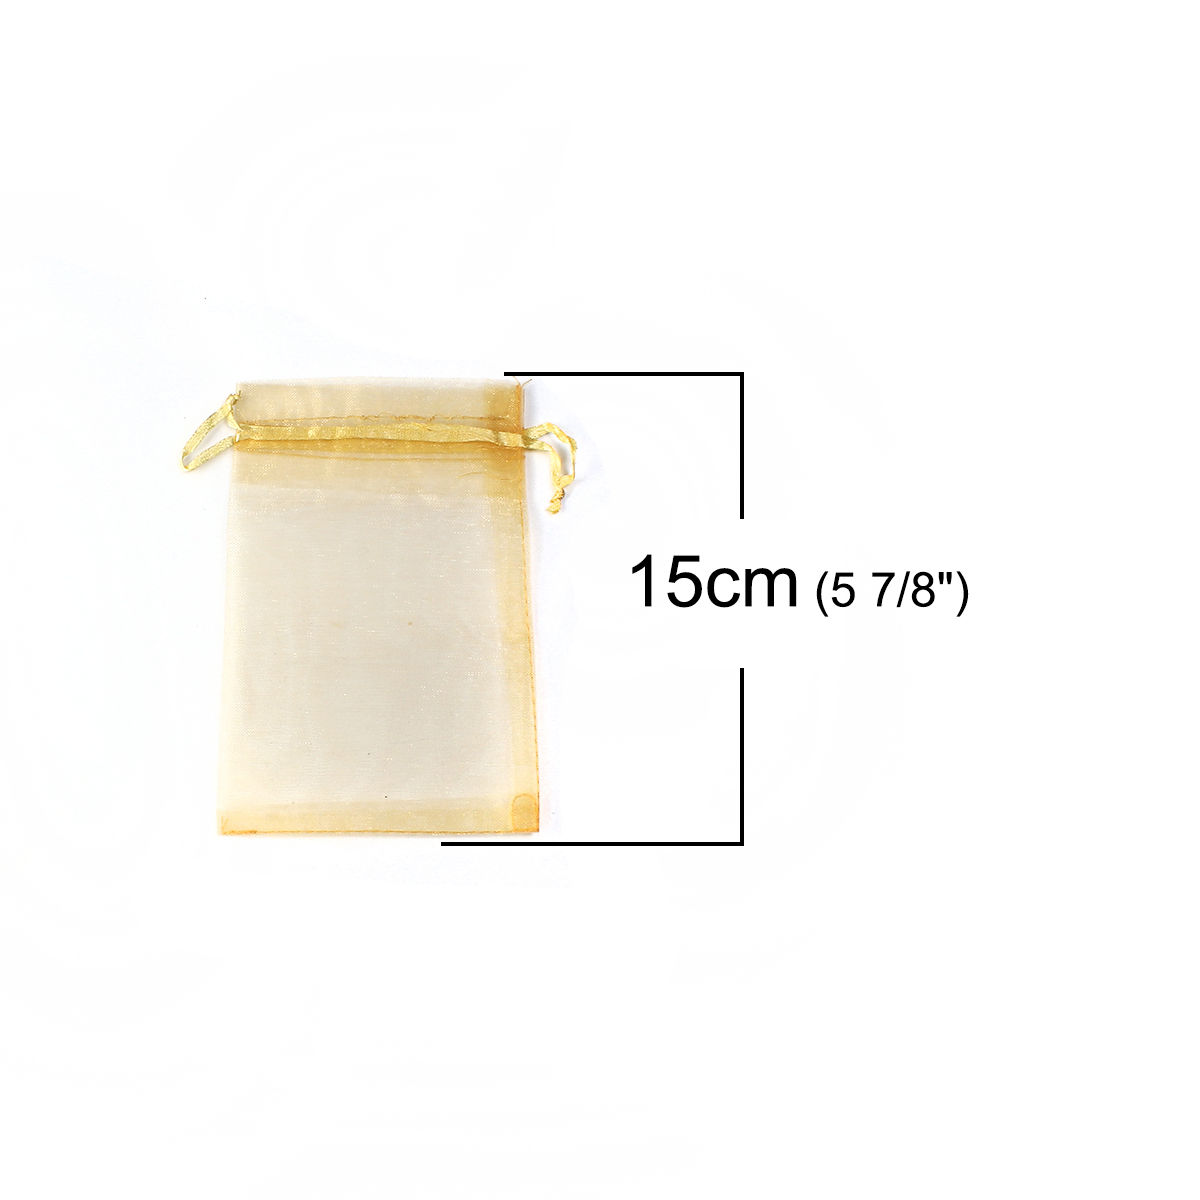 Picture of Wedding Gift Organza Jewelry Bags Drawstring Rectangle Golden (Usable Space: 13x10cm) 15cm(5 7/8") x 10cm(3 7/8"), 20 PCs